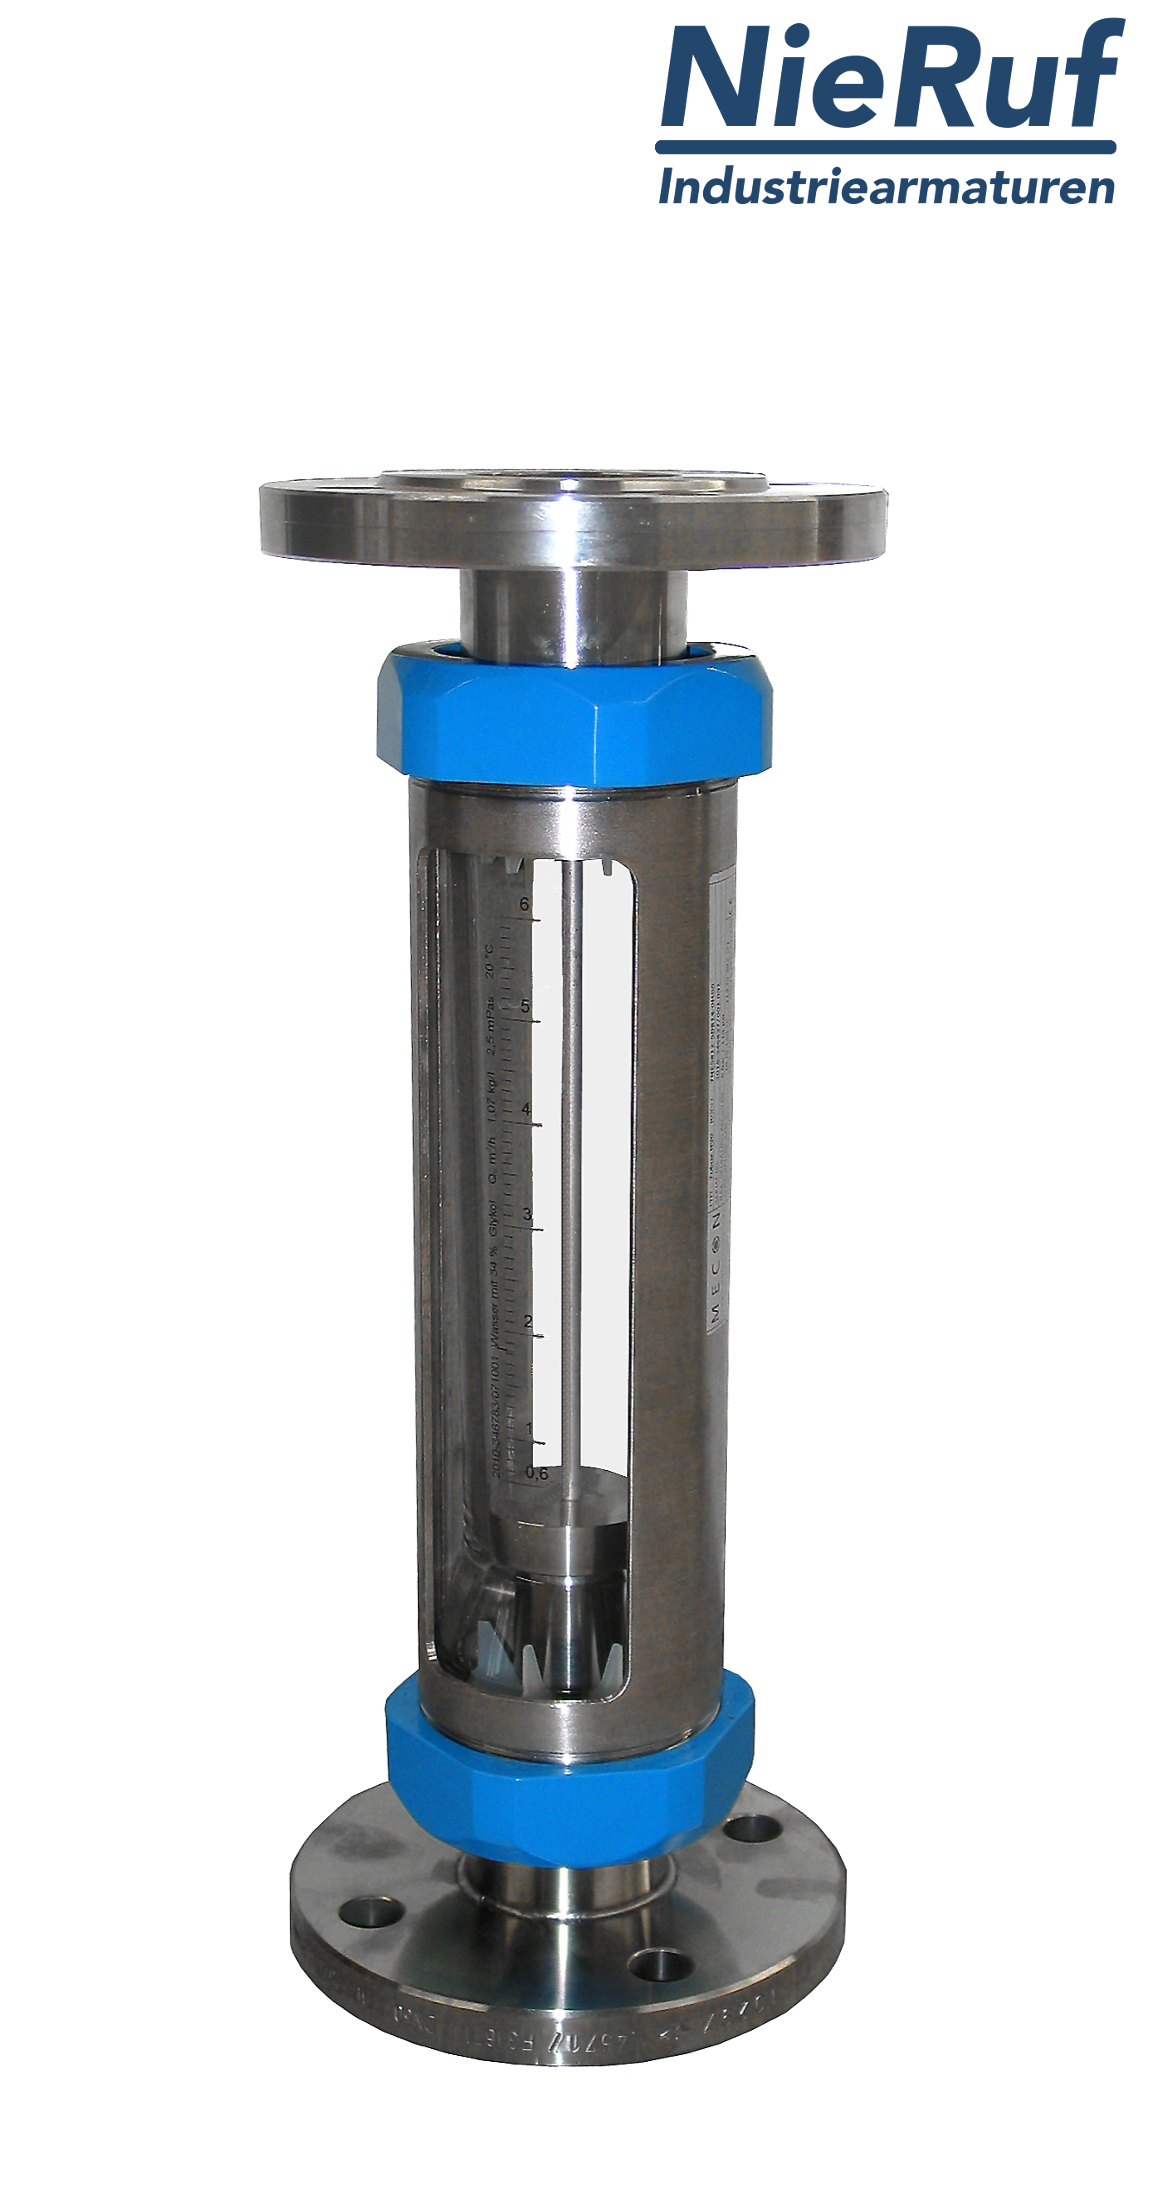 Variable area flowmeter stainless steel + borosilicate flange DN15 6.5 - 65.0 l/h water FKM